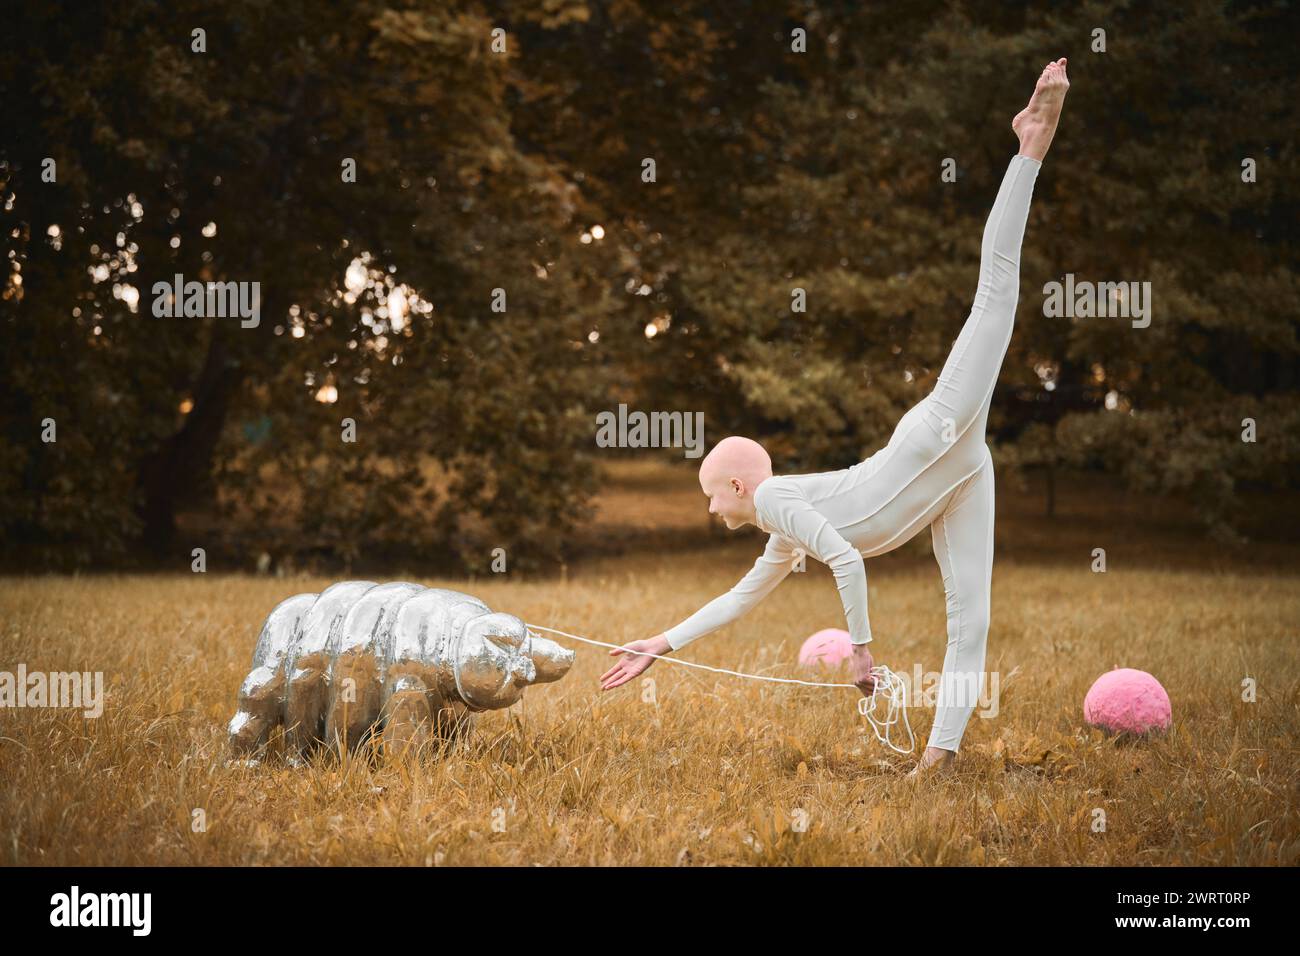 Portrait of young hairless girl ballerina with alopecia in white cloth playing with tardigrade toy in fall park, surreal scene with bald teenage girl Stock Photo